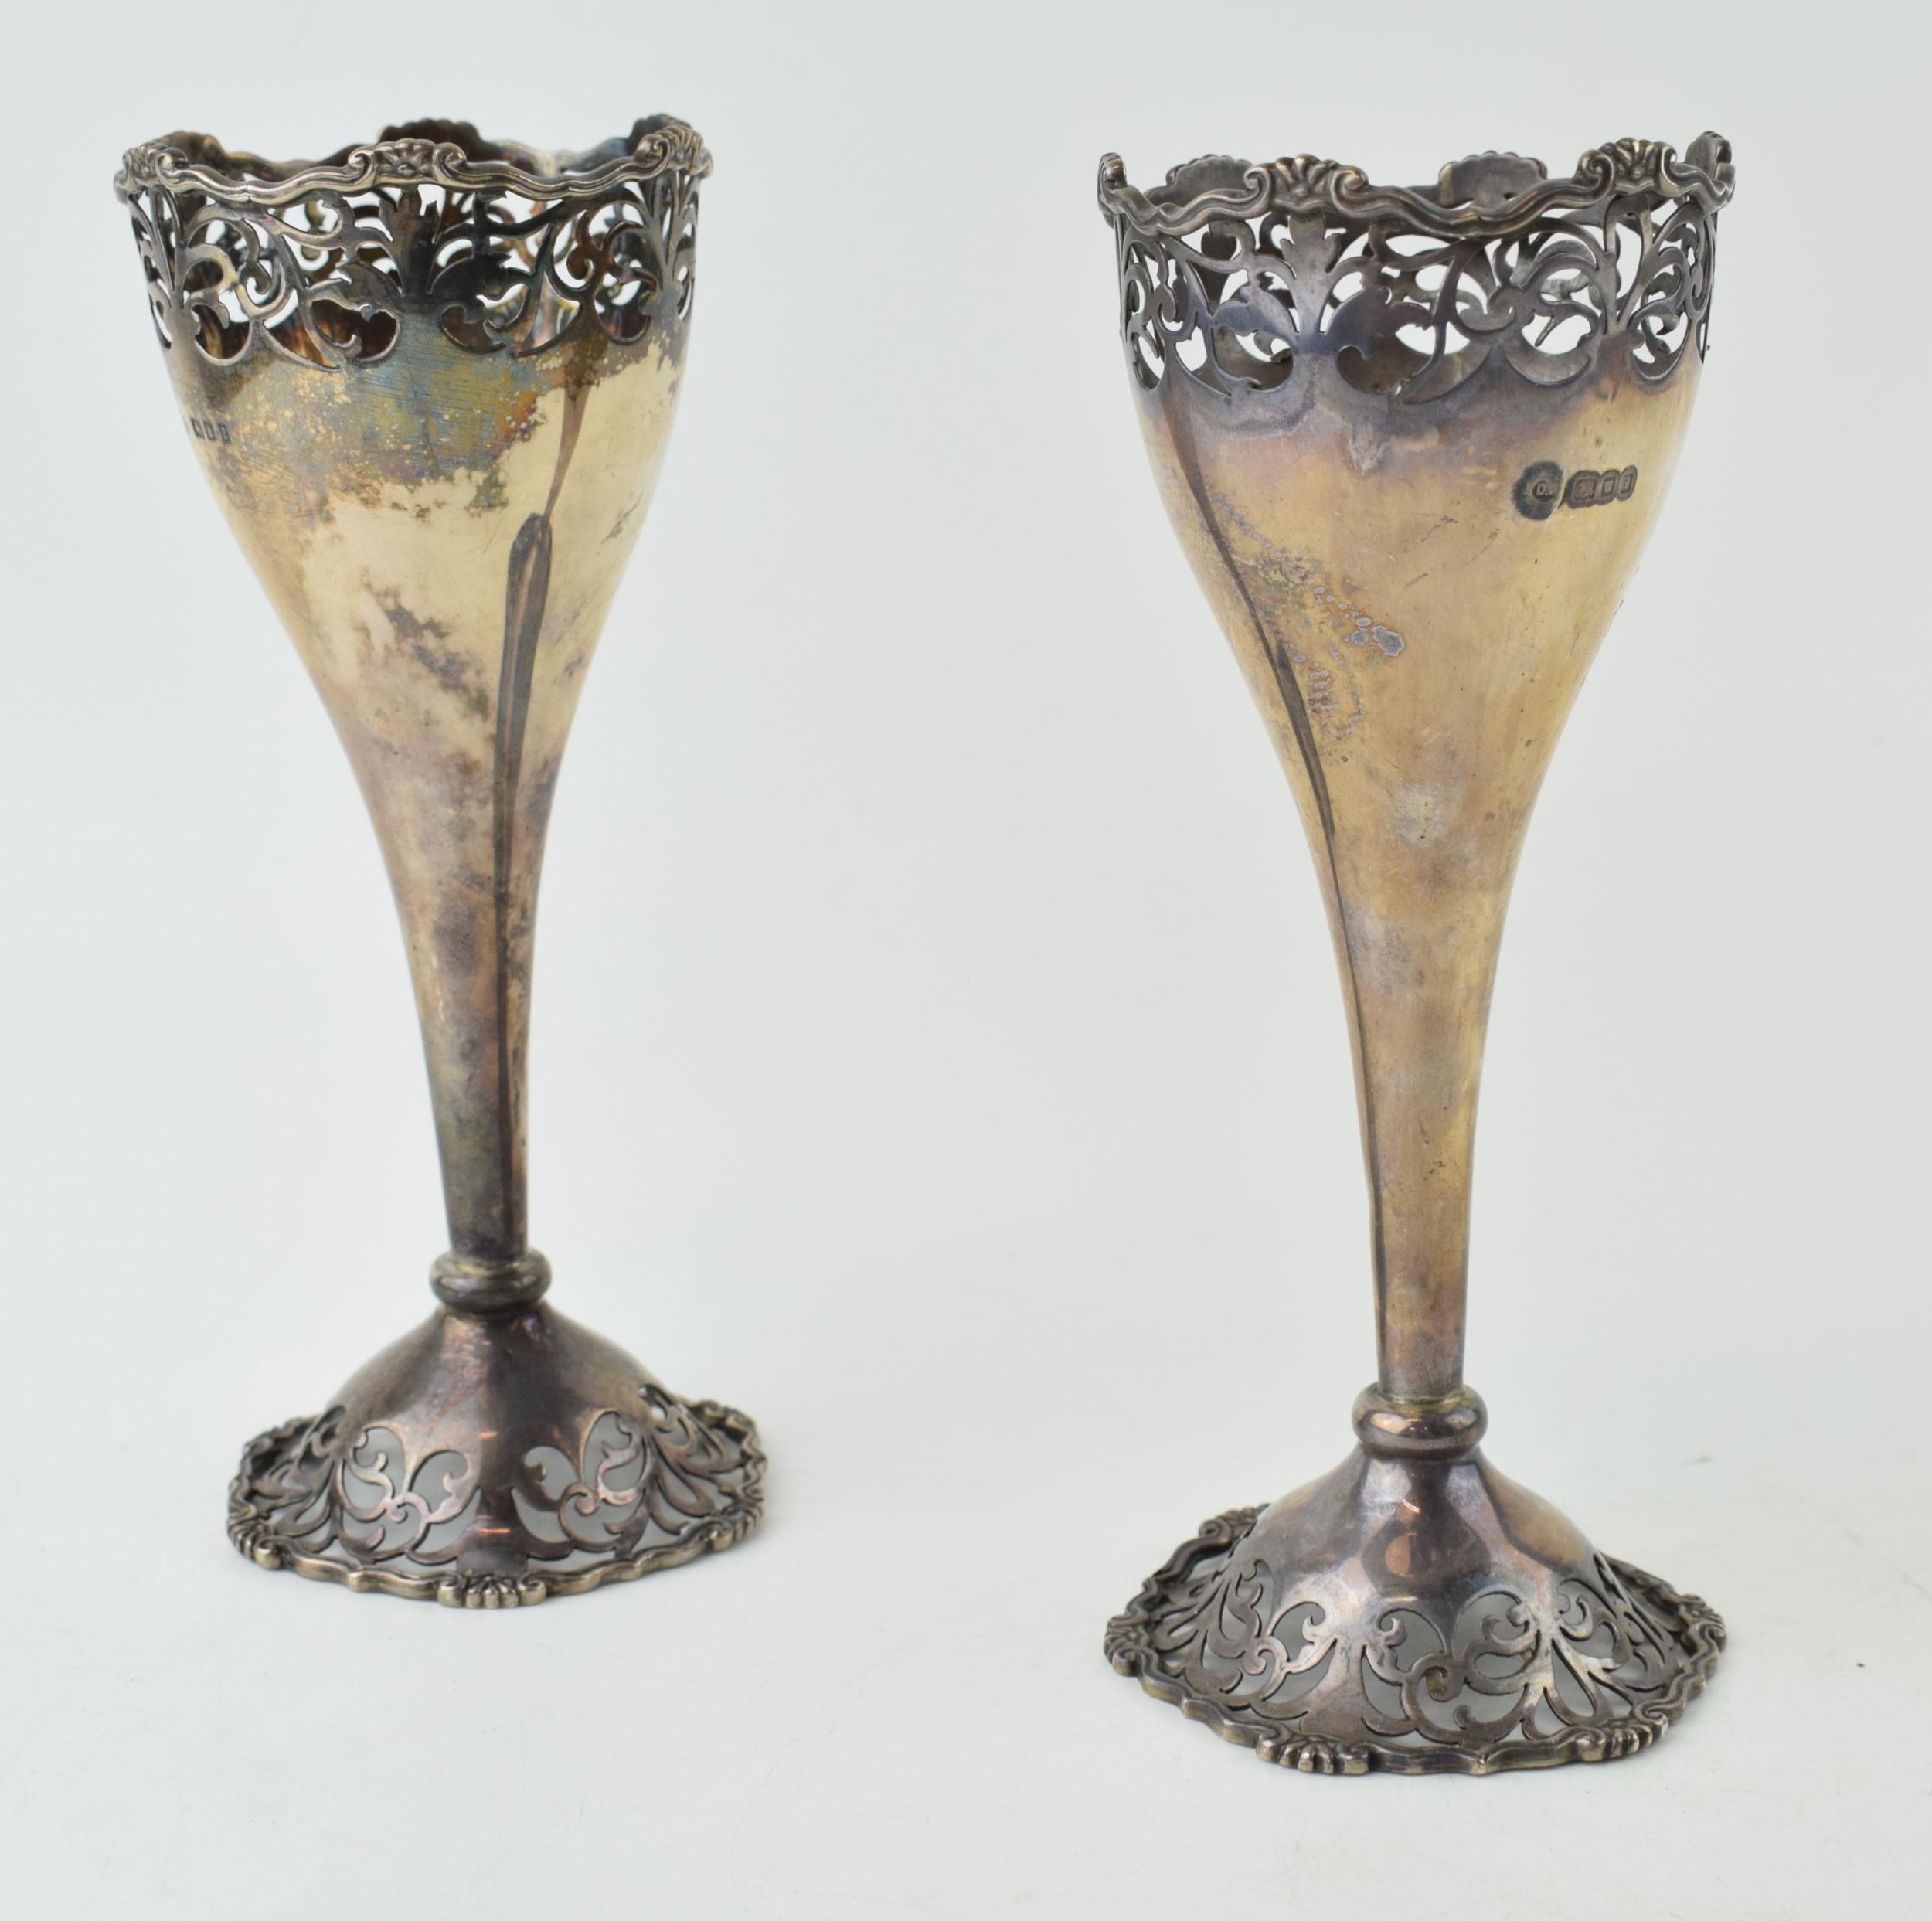 A near pair of Art Nouveau style vases hallmarked London 1920 and 1924. Height 16.5cm. Weight 209.